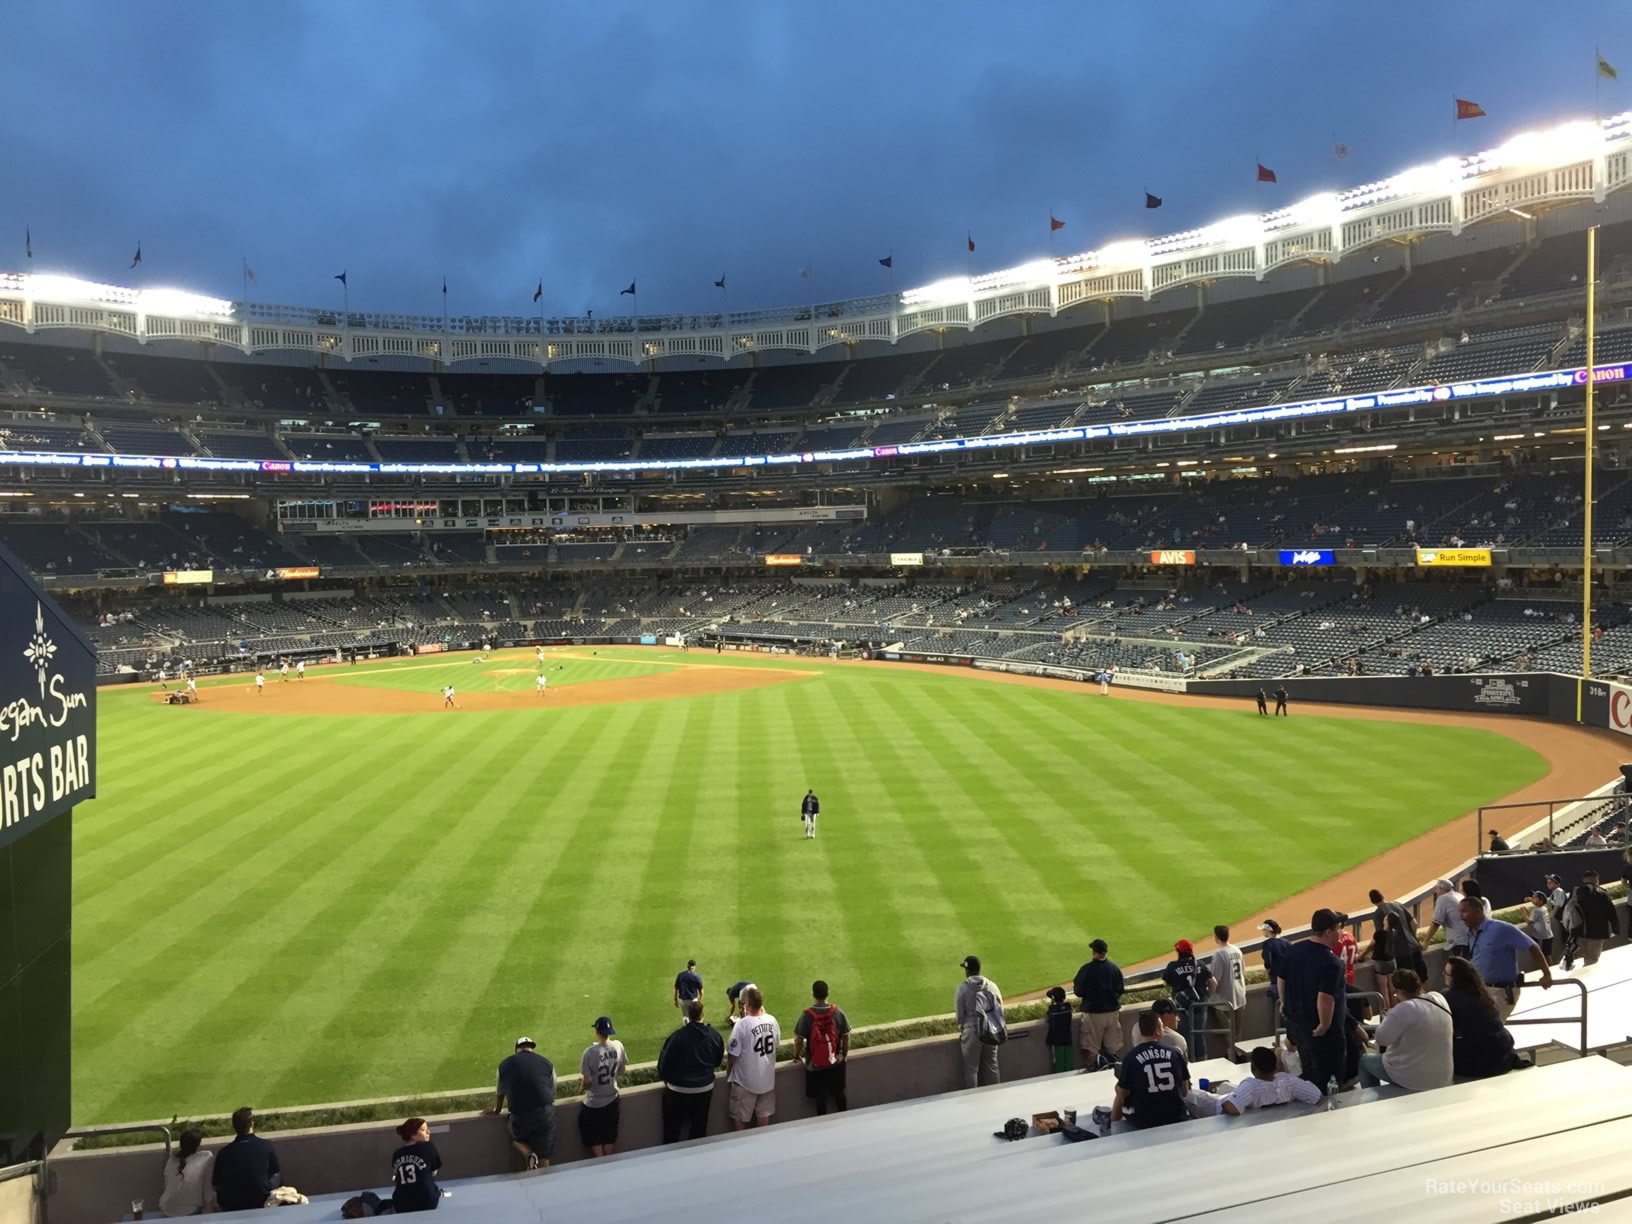 section 239, row 20 seat view  for baseball - yankee stadium